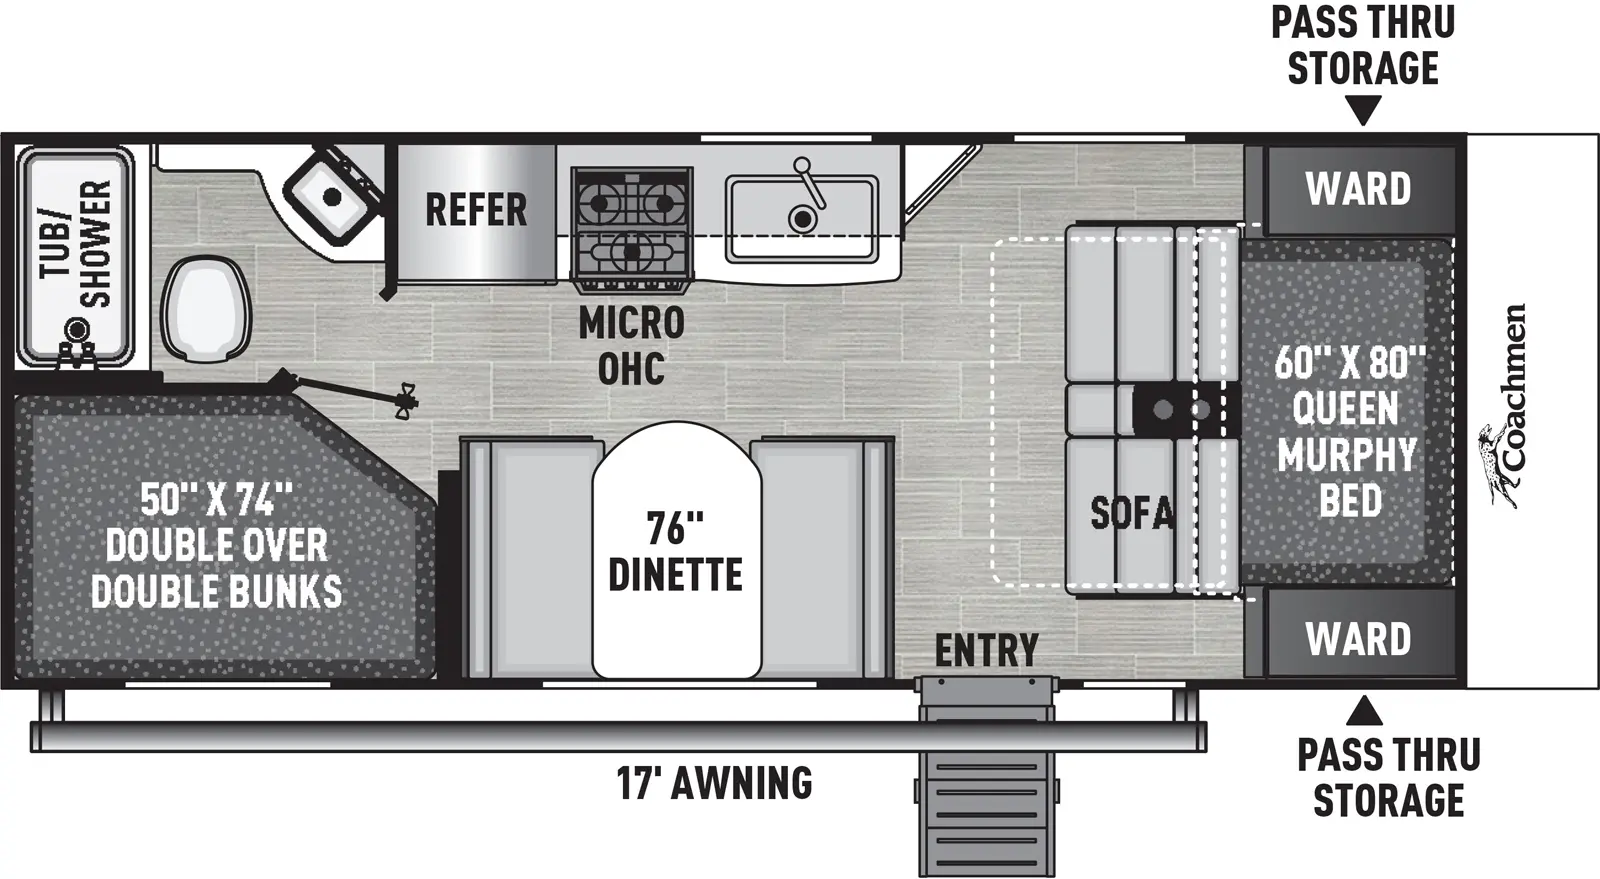 The 22SE has no slide outs and one entry door. Exterior features front pass-thru storage and a 17 foot awning. Interior layout front to back: queen murphy bed sofa with wardrobes on each side; off-door side kitchen counter with sink, cooktop, overhead cabinet, microwave, and refrigerator; door side entry, and dinette; rear off-door side full bathroom; rear door side double over double bunks.